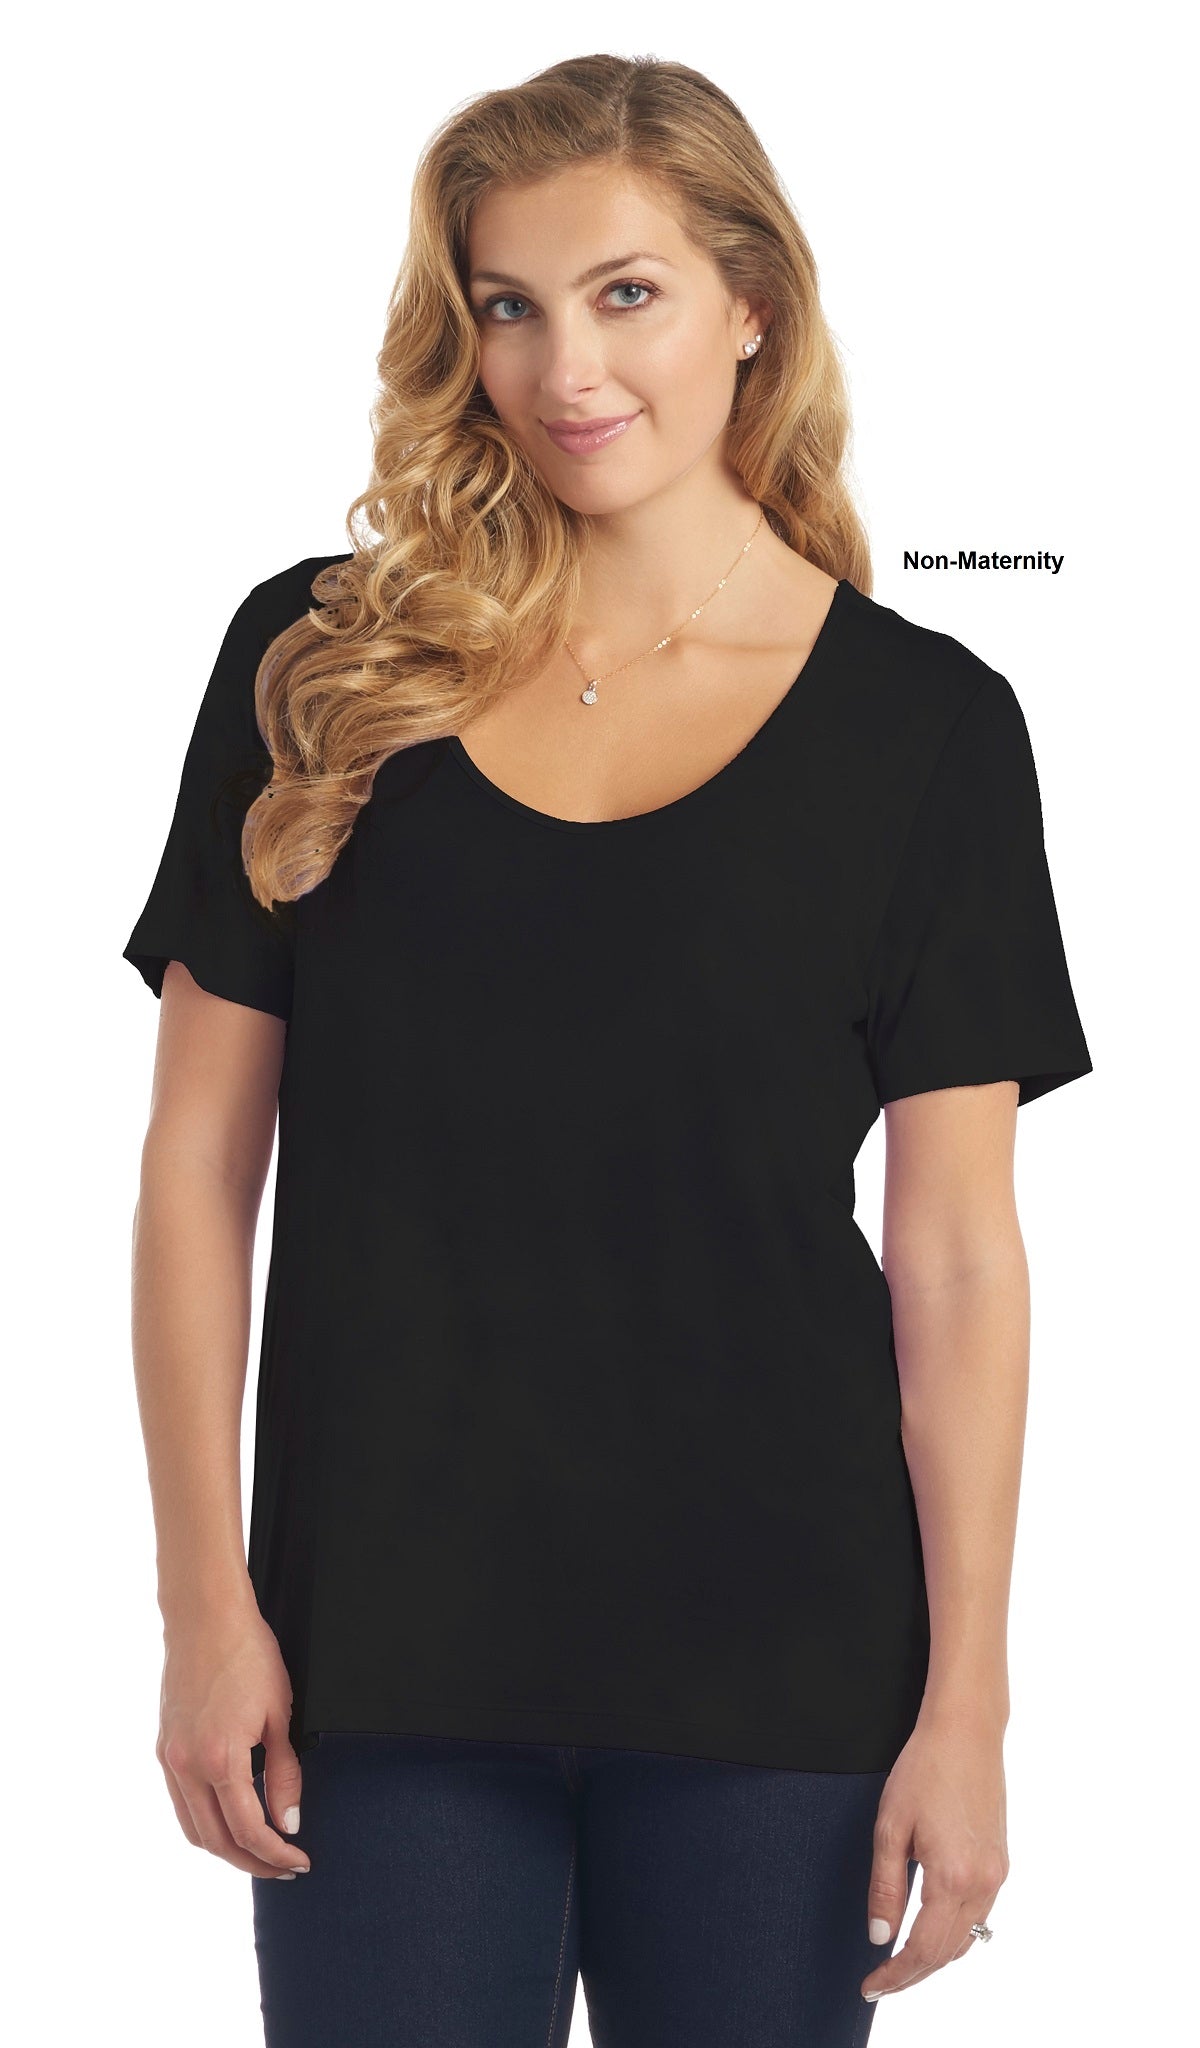 Black Solid Erika tee worn by woman as non-maternity style.